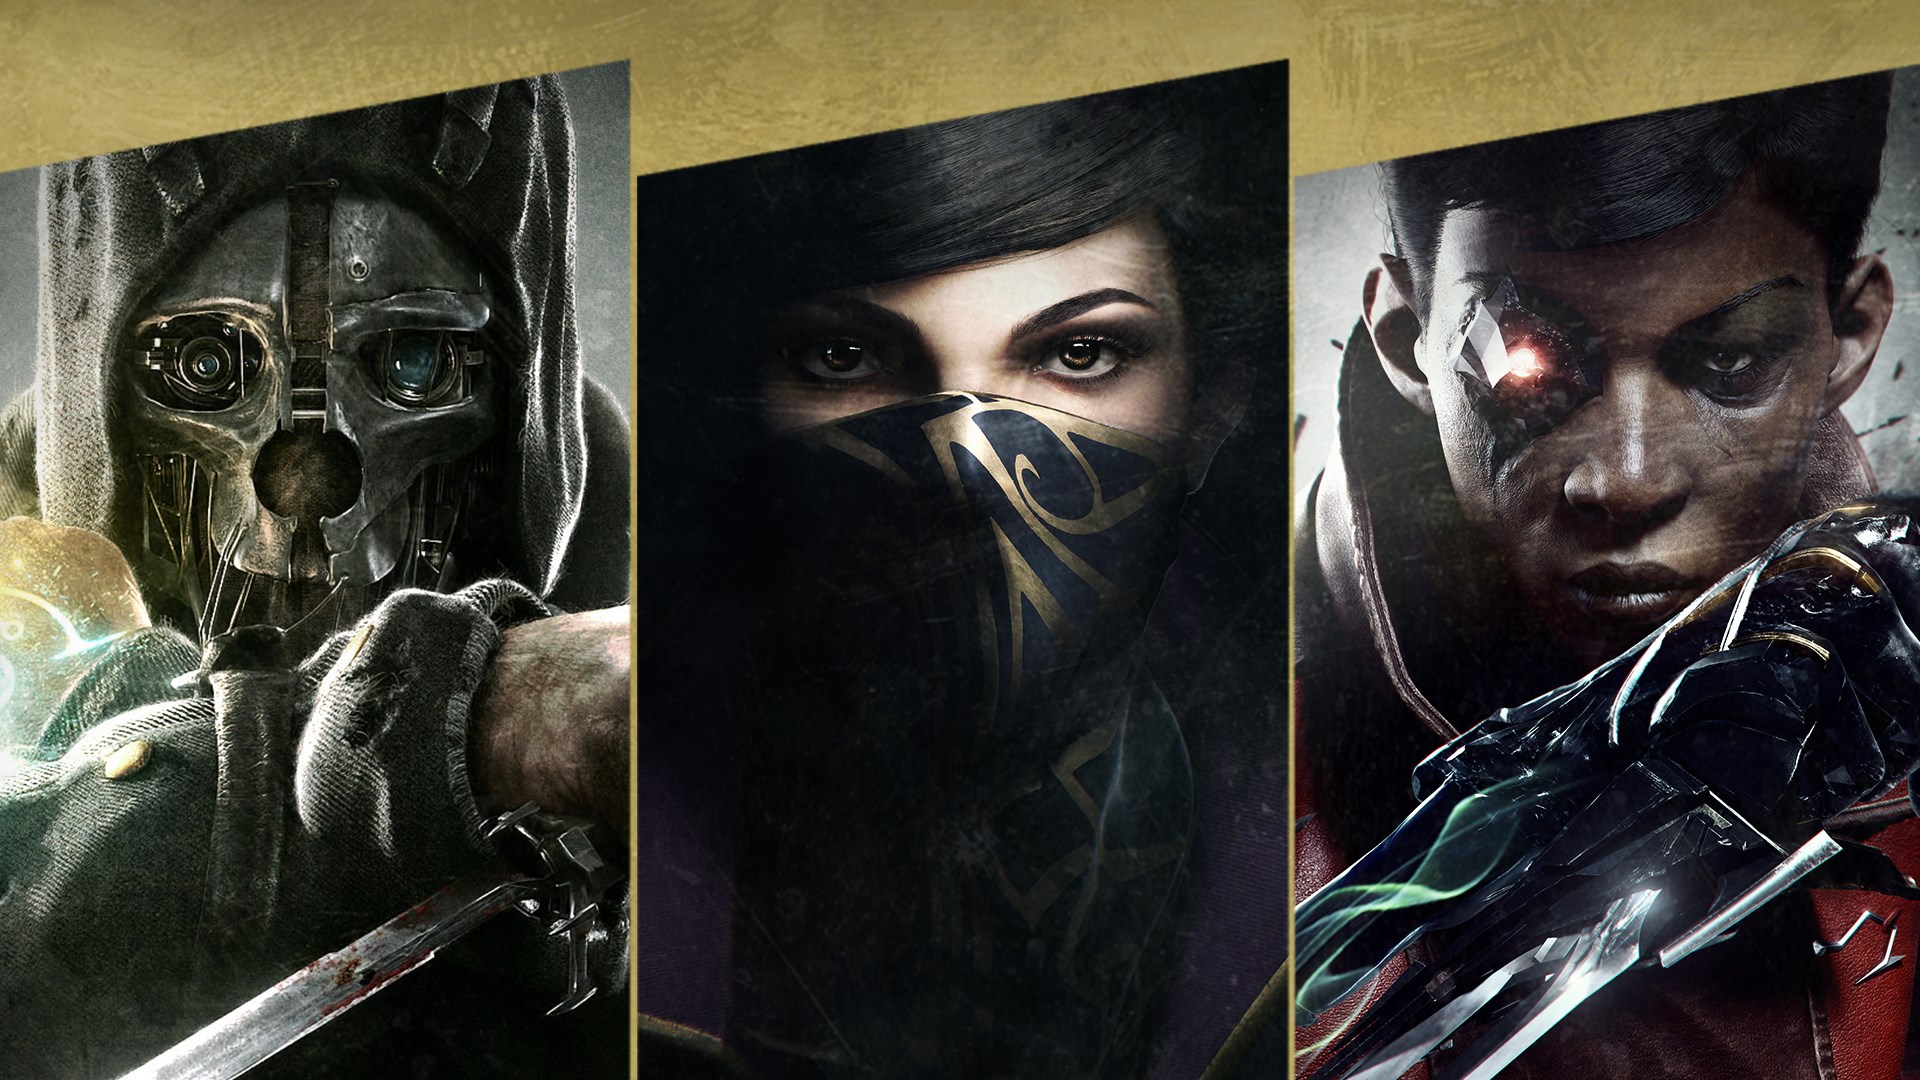 dishonored 2 microsoft store - Online Discount Shop for Electronics,  Apparel, Toys, Books, Games, Computers, Shoes, Jewelry, Watches, Baby  Products, Sports & Outdoors, Office Products, Bed & Bath, Furniture, Tools,  Hardware, Automotive